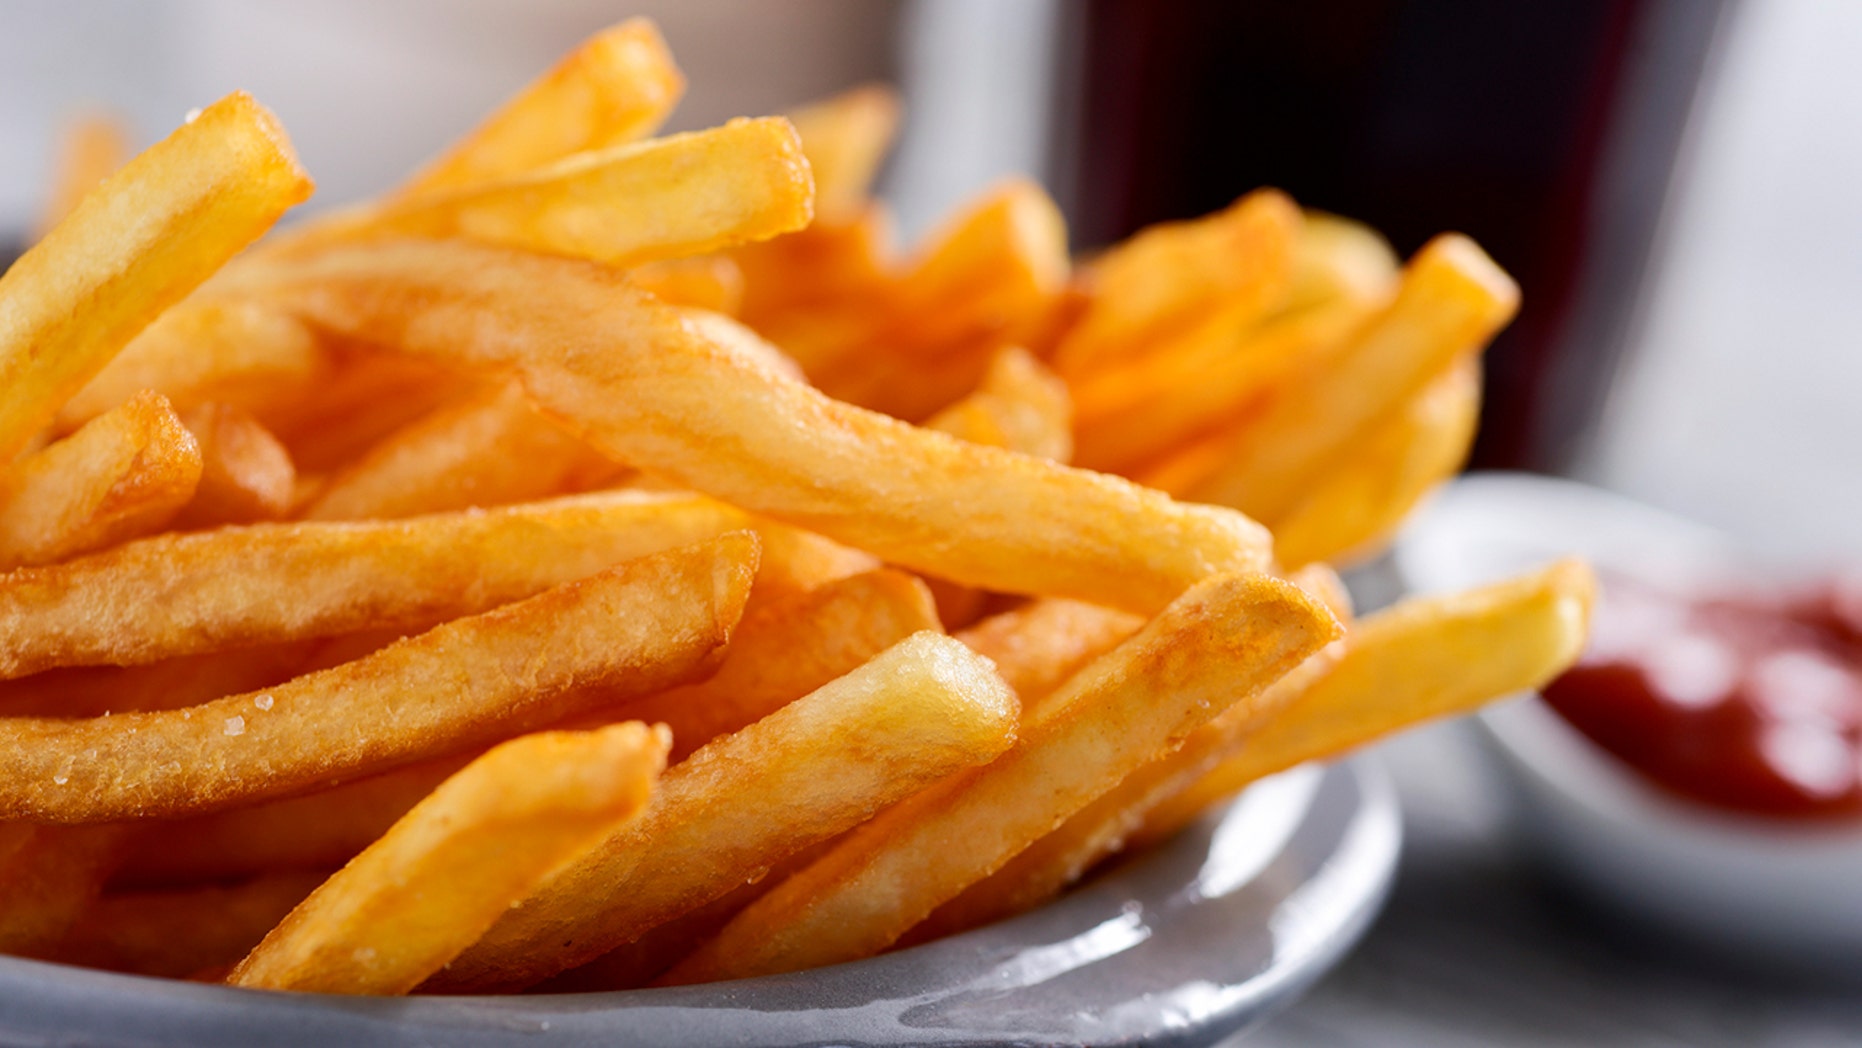 Harvard professor who suggested eating only 6 French fries responds to ...